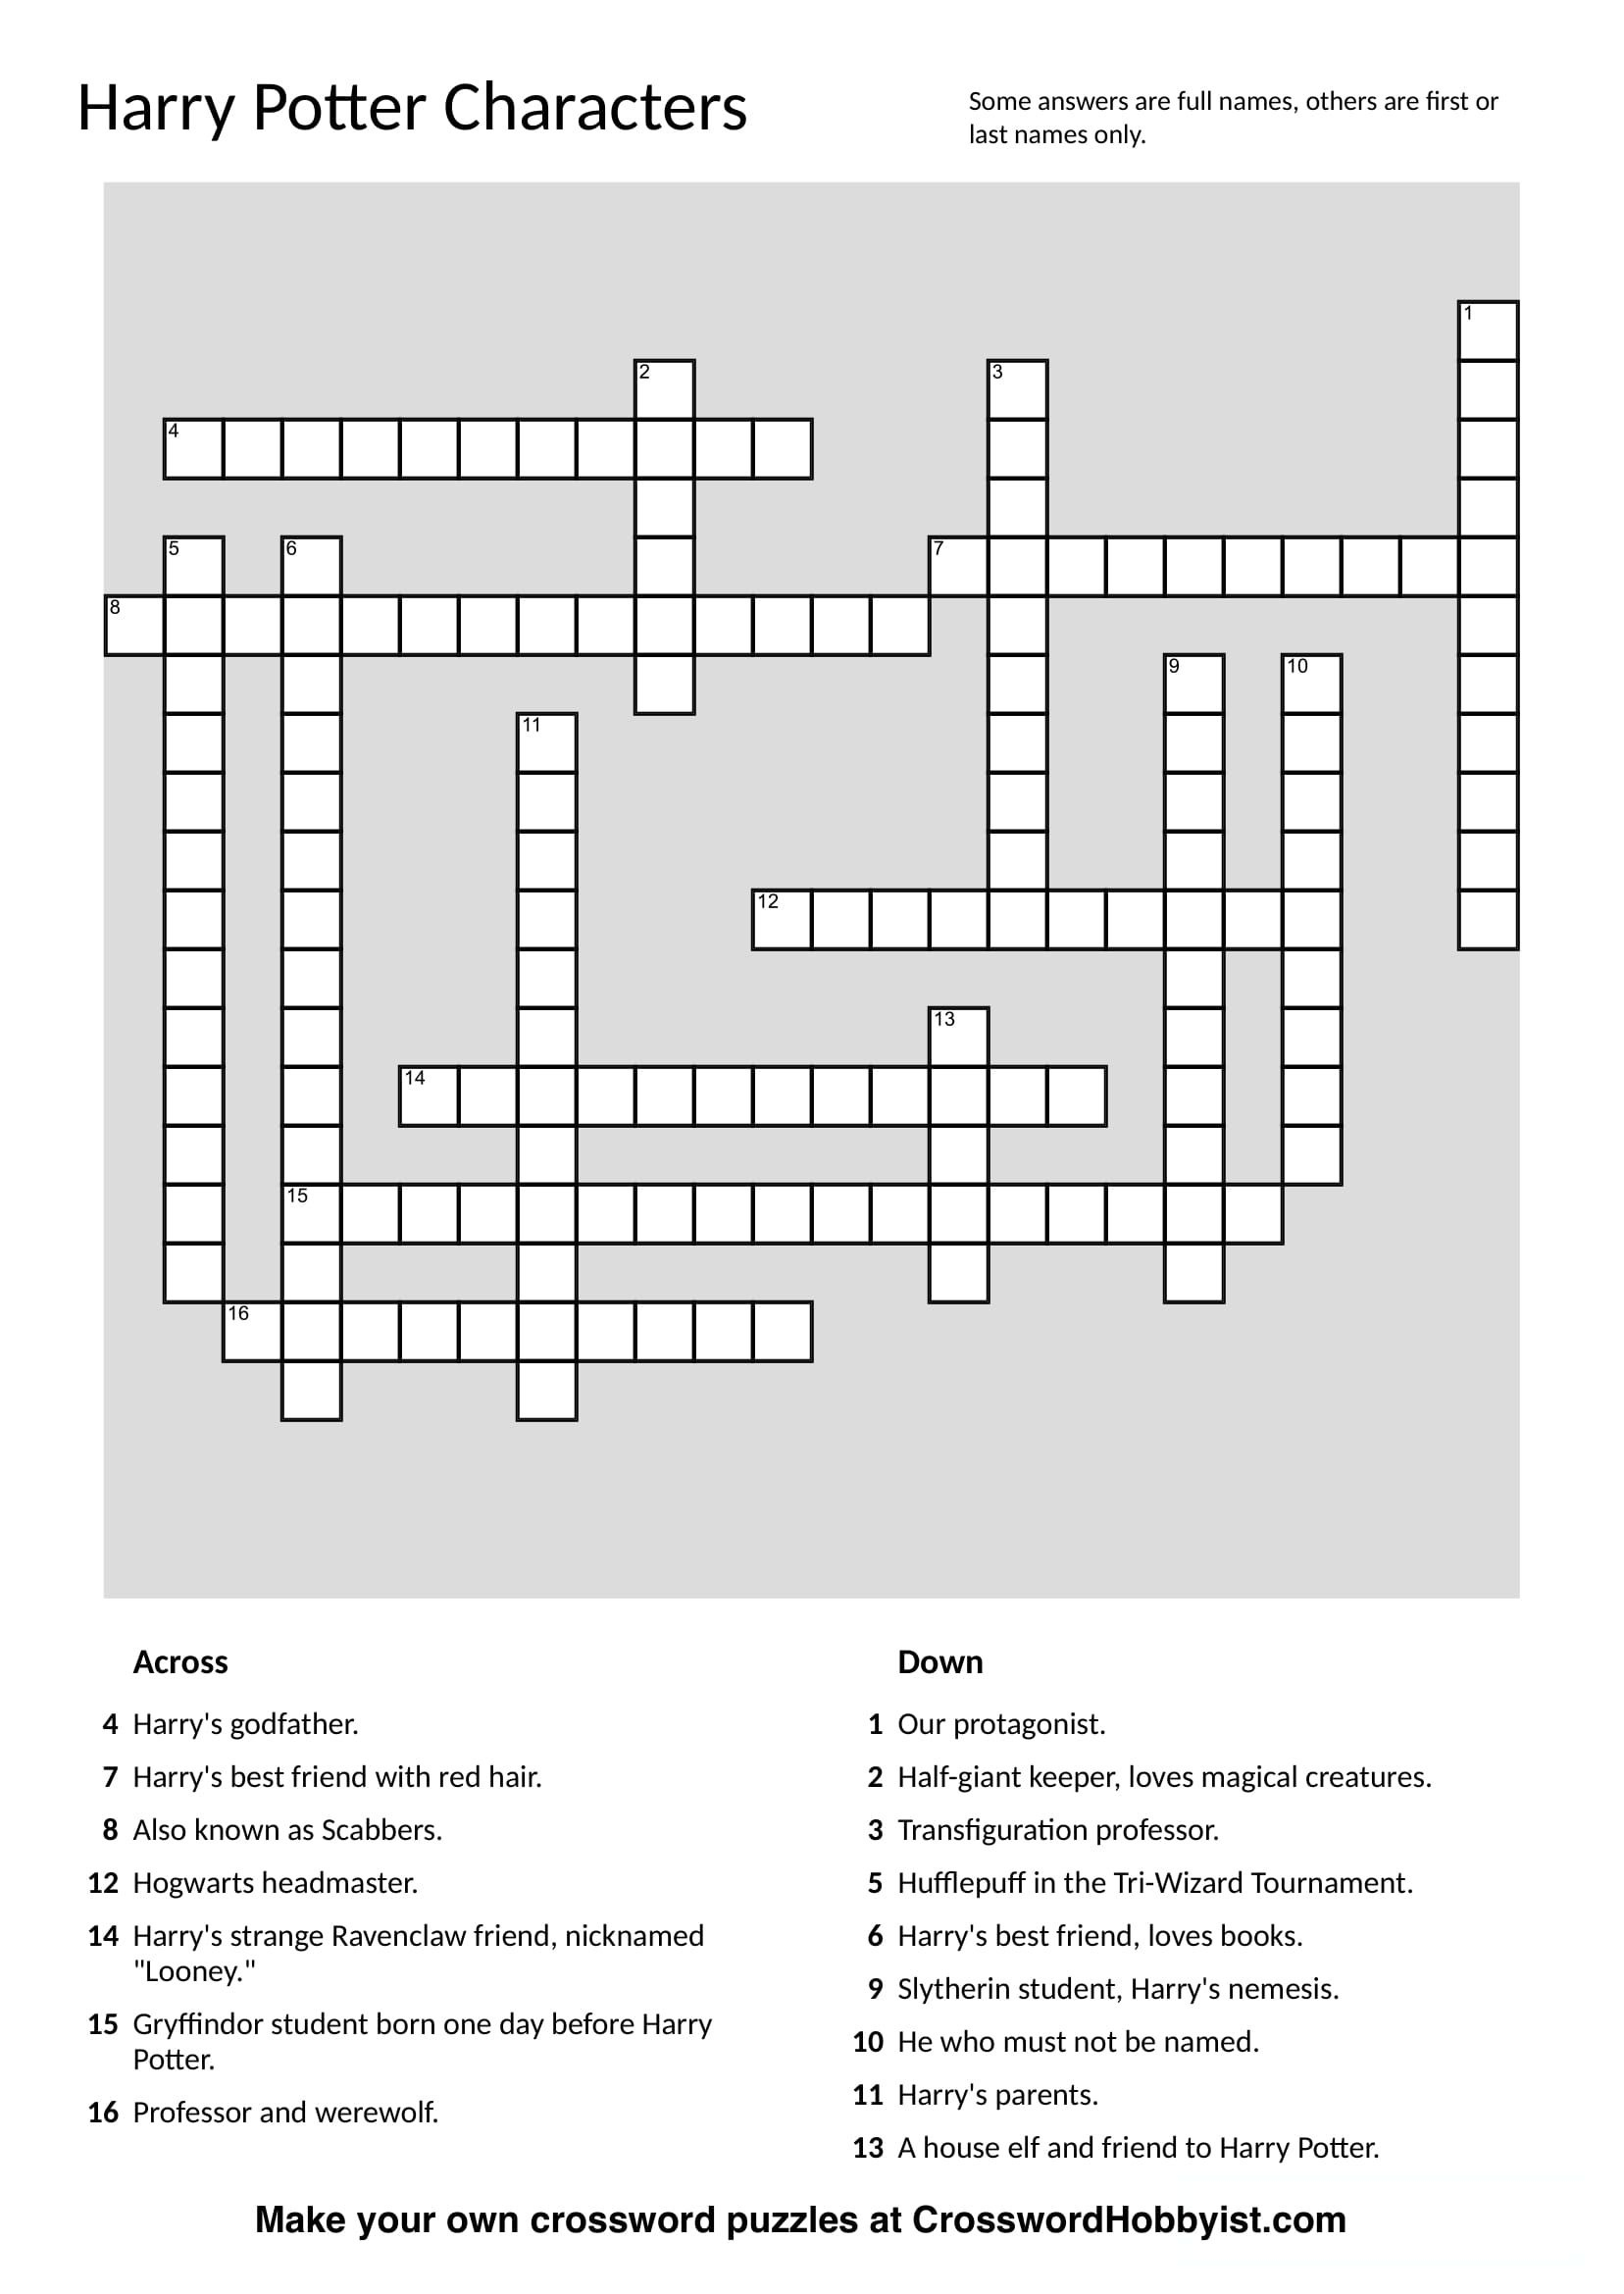 Make Your Own Crossword Puzzle Printable | Printable Crossword Puzzles